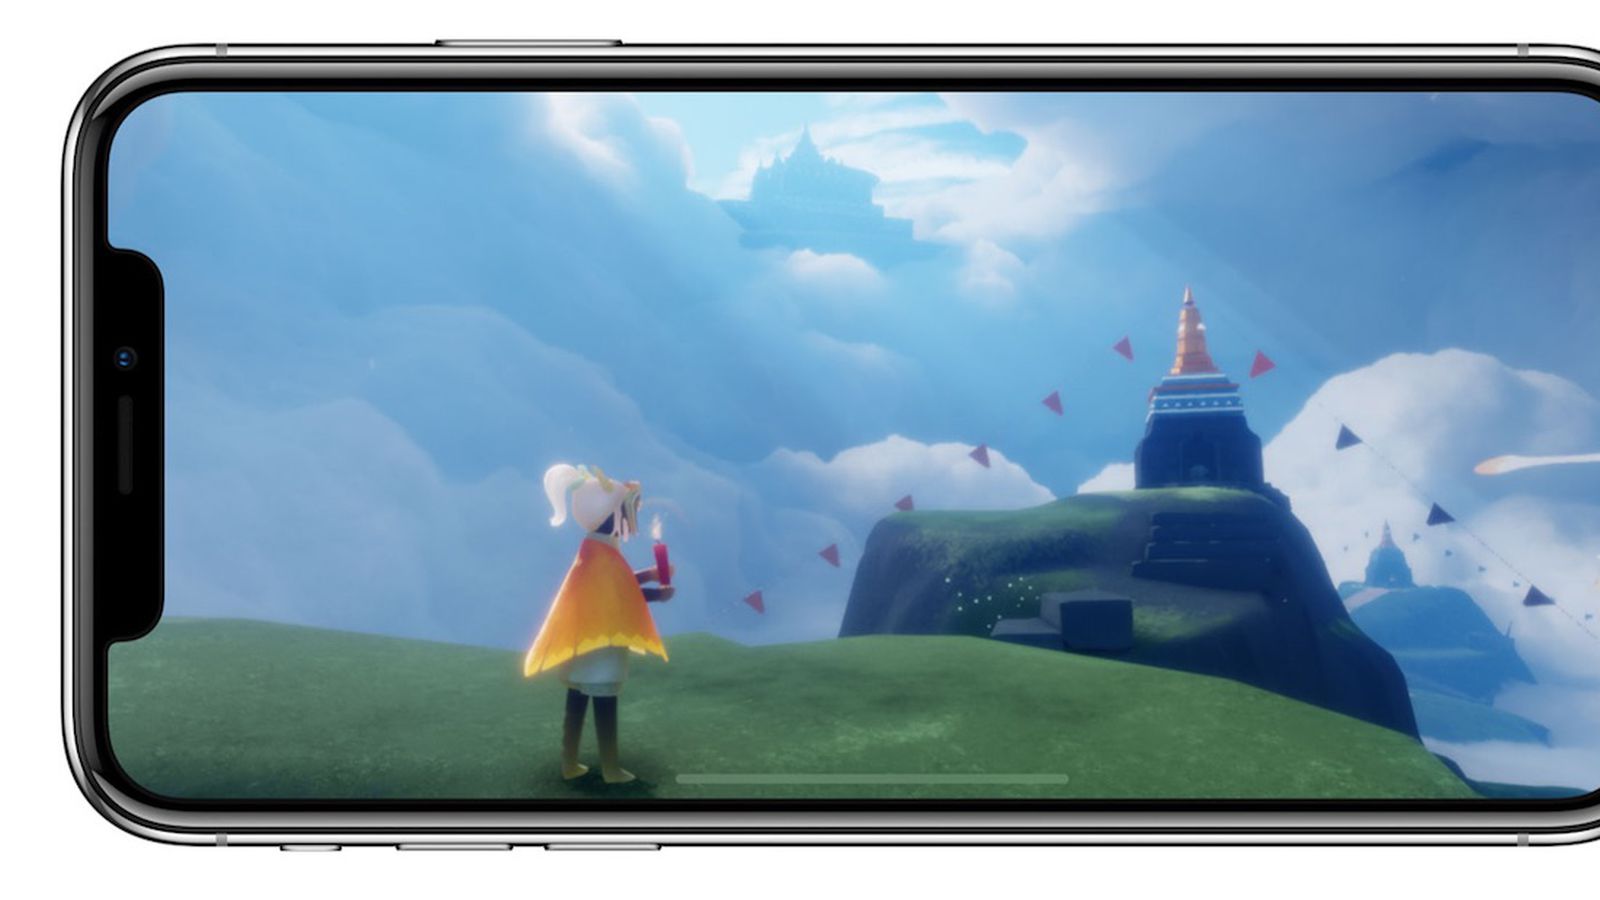 iPhone and Apple TV Game 'Sky' Will Feature 'Innovative' Payment Model -  MacRumors